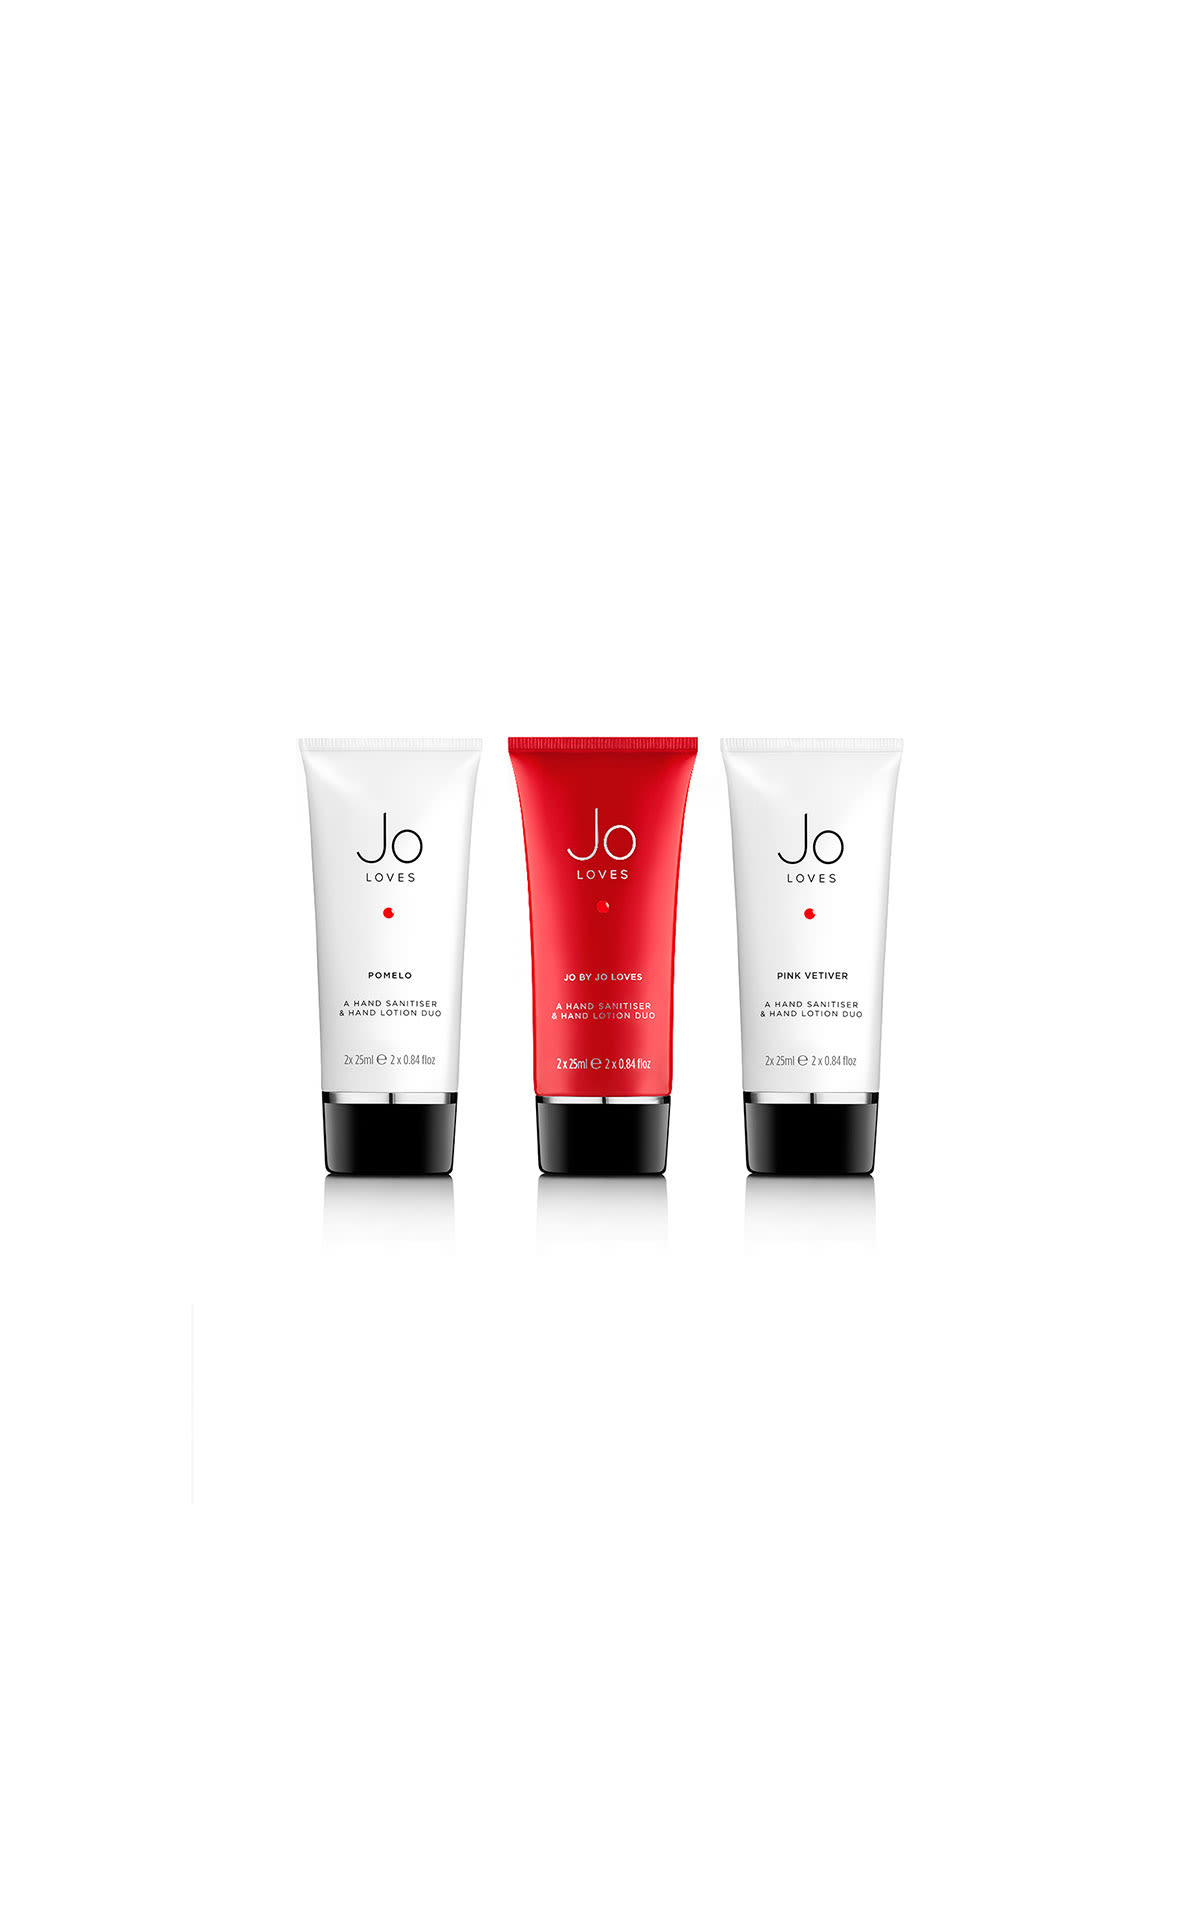 Jo Loves Protect and perfect bundle 3x hand sanitiser and hand lotion duo from Bicester Village